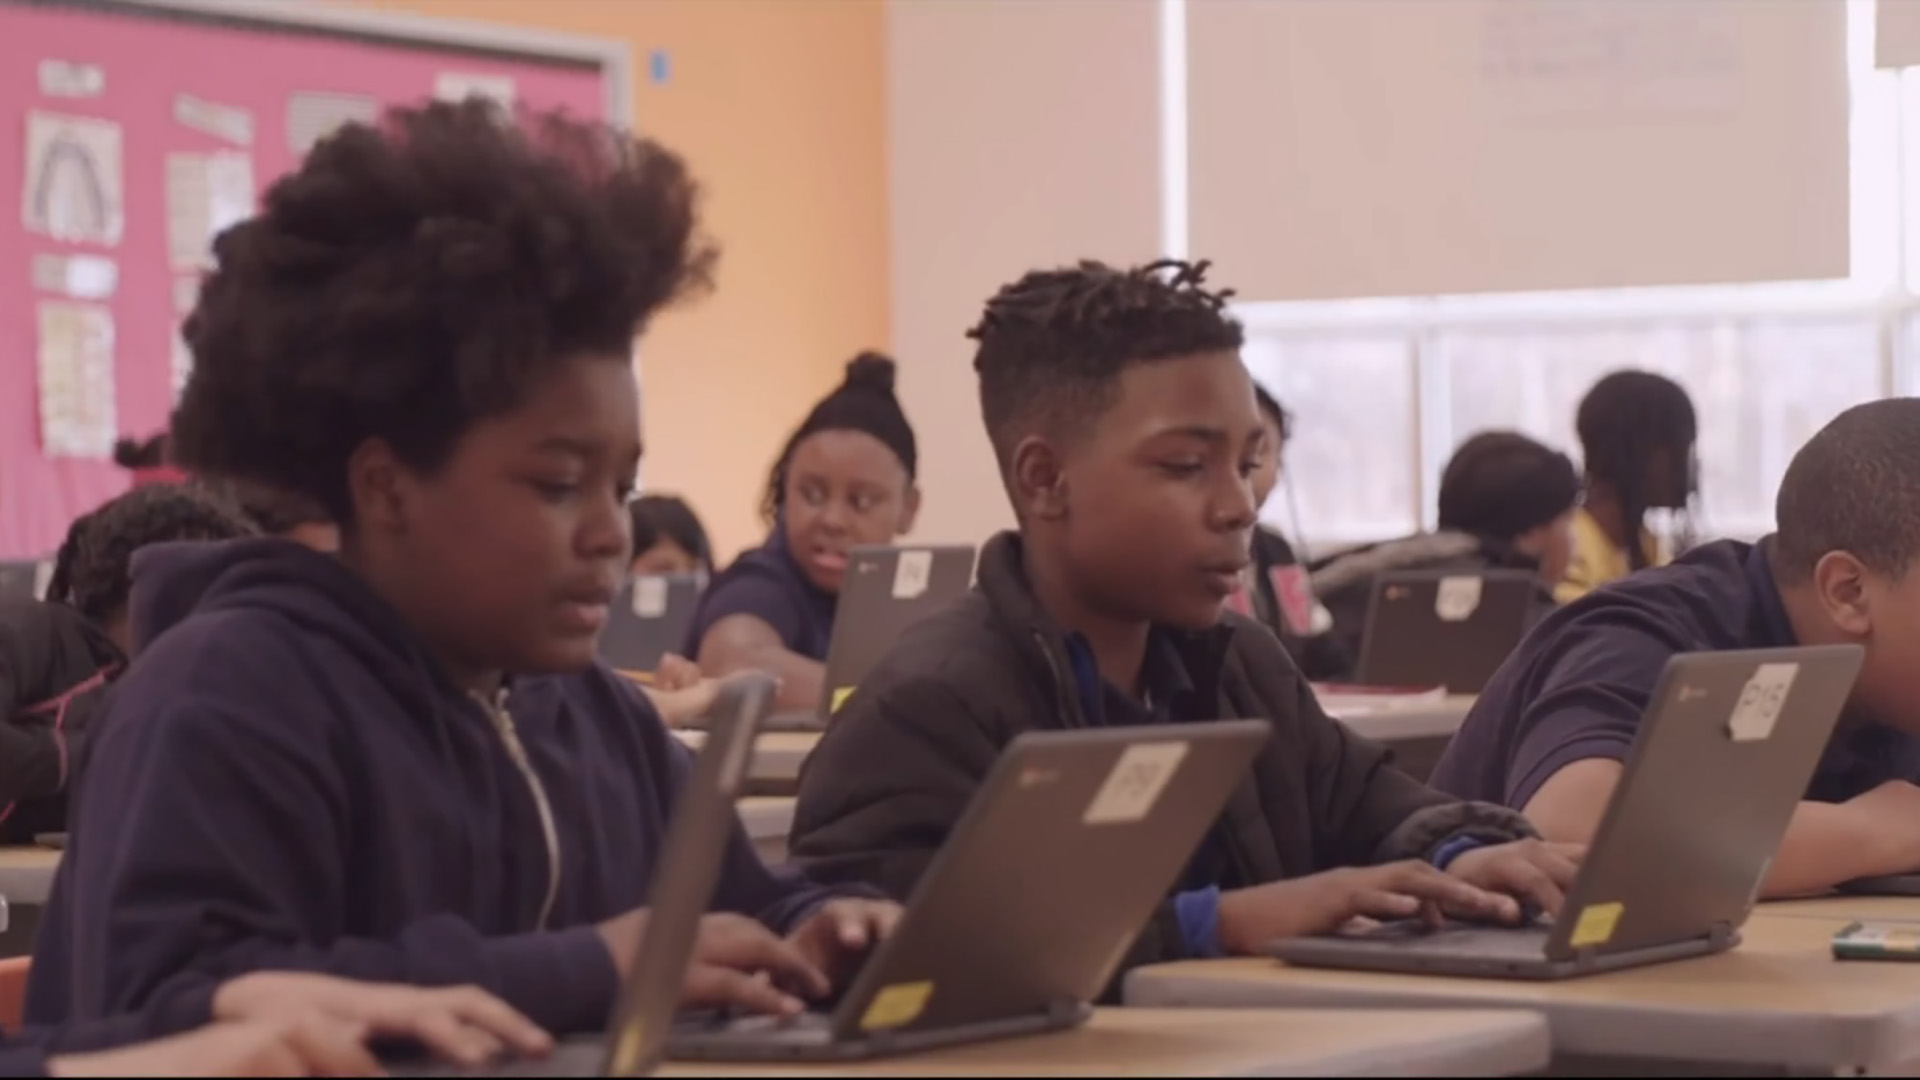 Students at Fort Worthington Elementary and Middle School use Lenovo laptops in the classroom